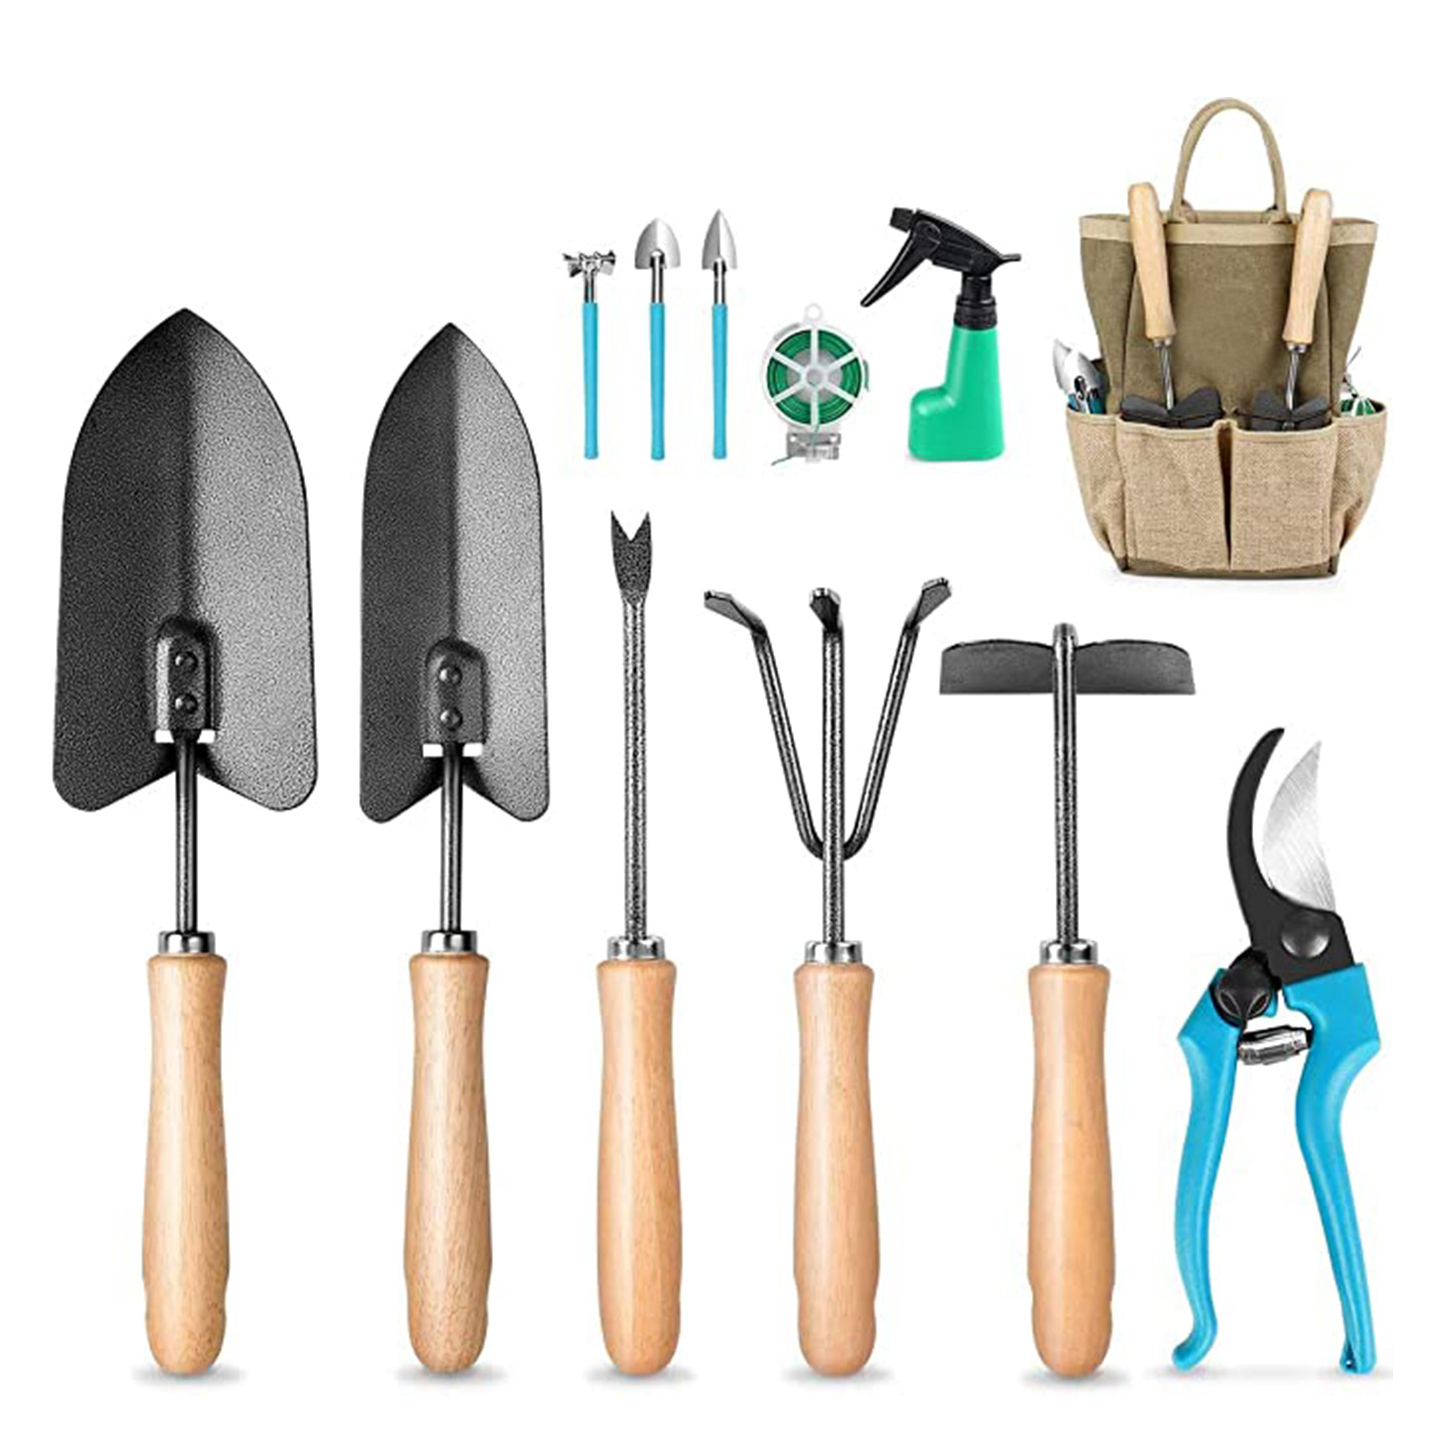 Low price for Garden Shovel - 12PCS Garden Tools with Cloth Bag – MACHINERY TOOLS